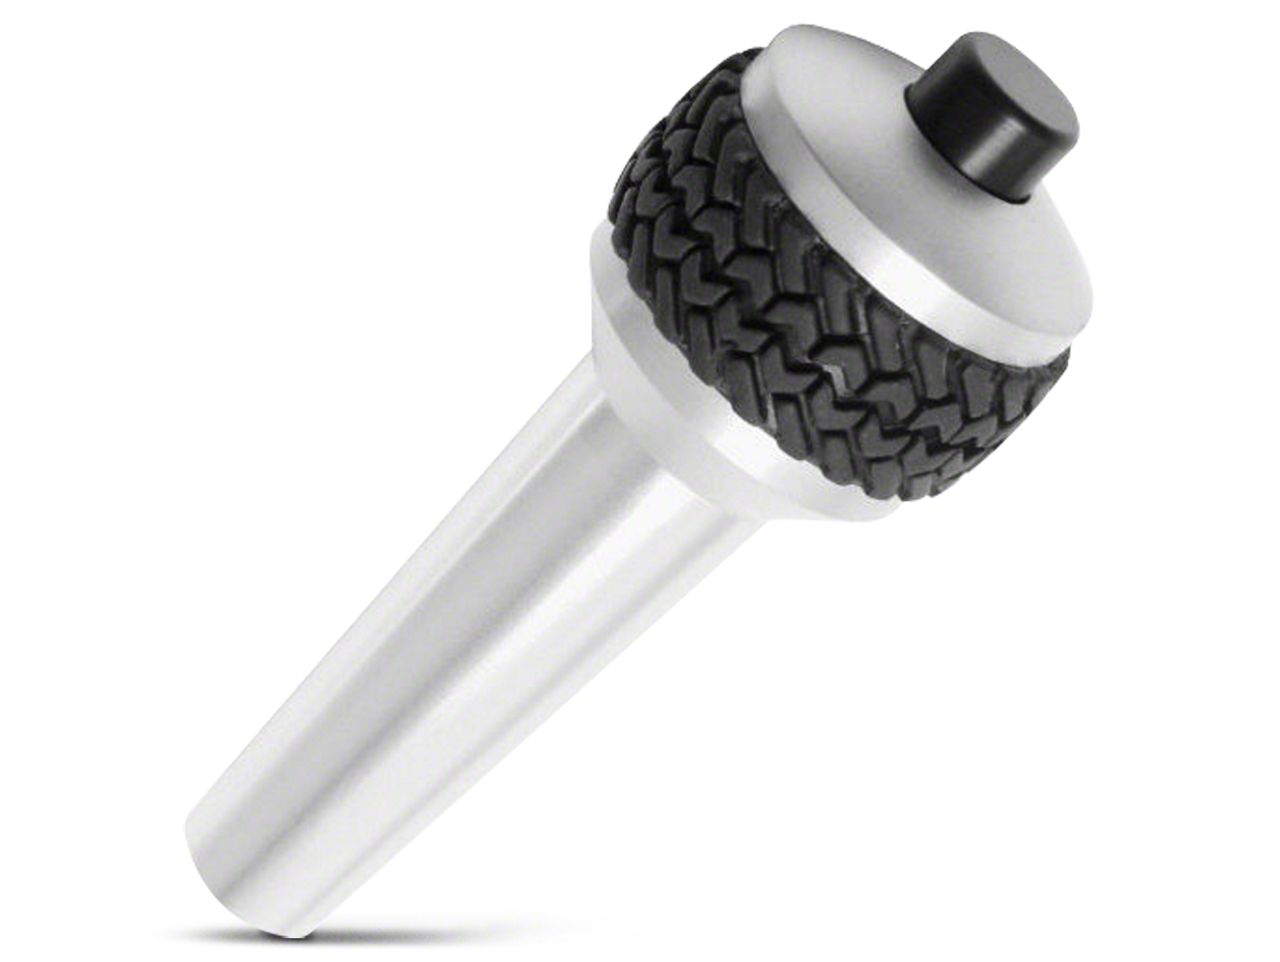 Tacoma Shift Knobs & Accessories 2005-2015